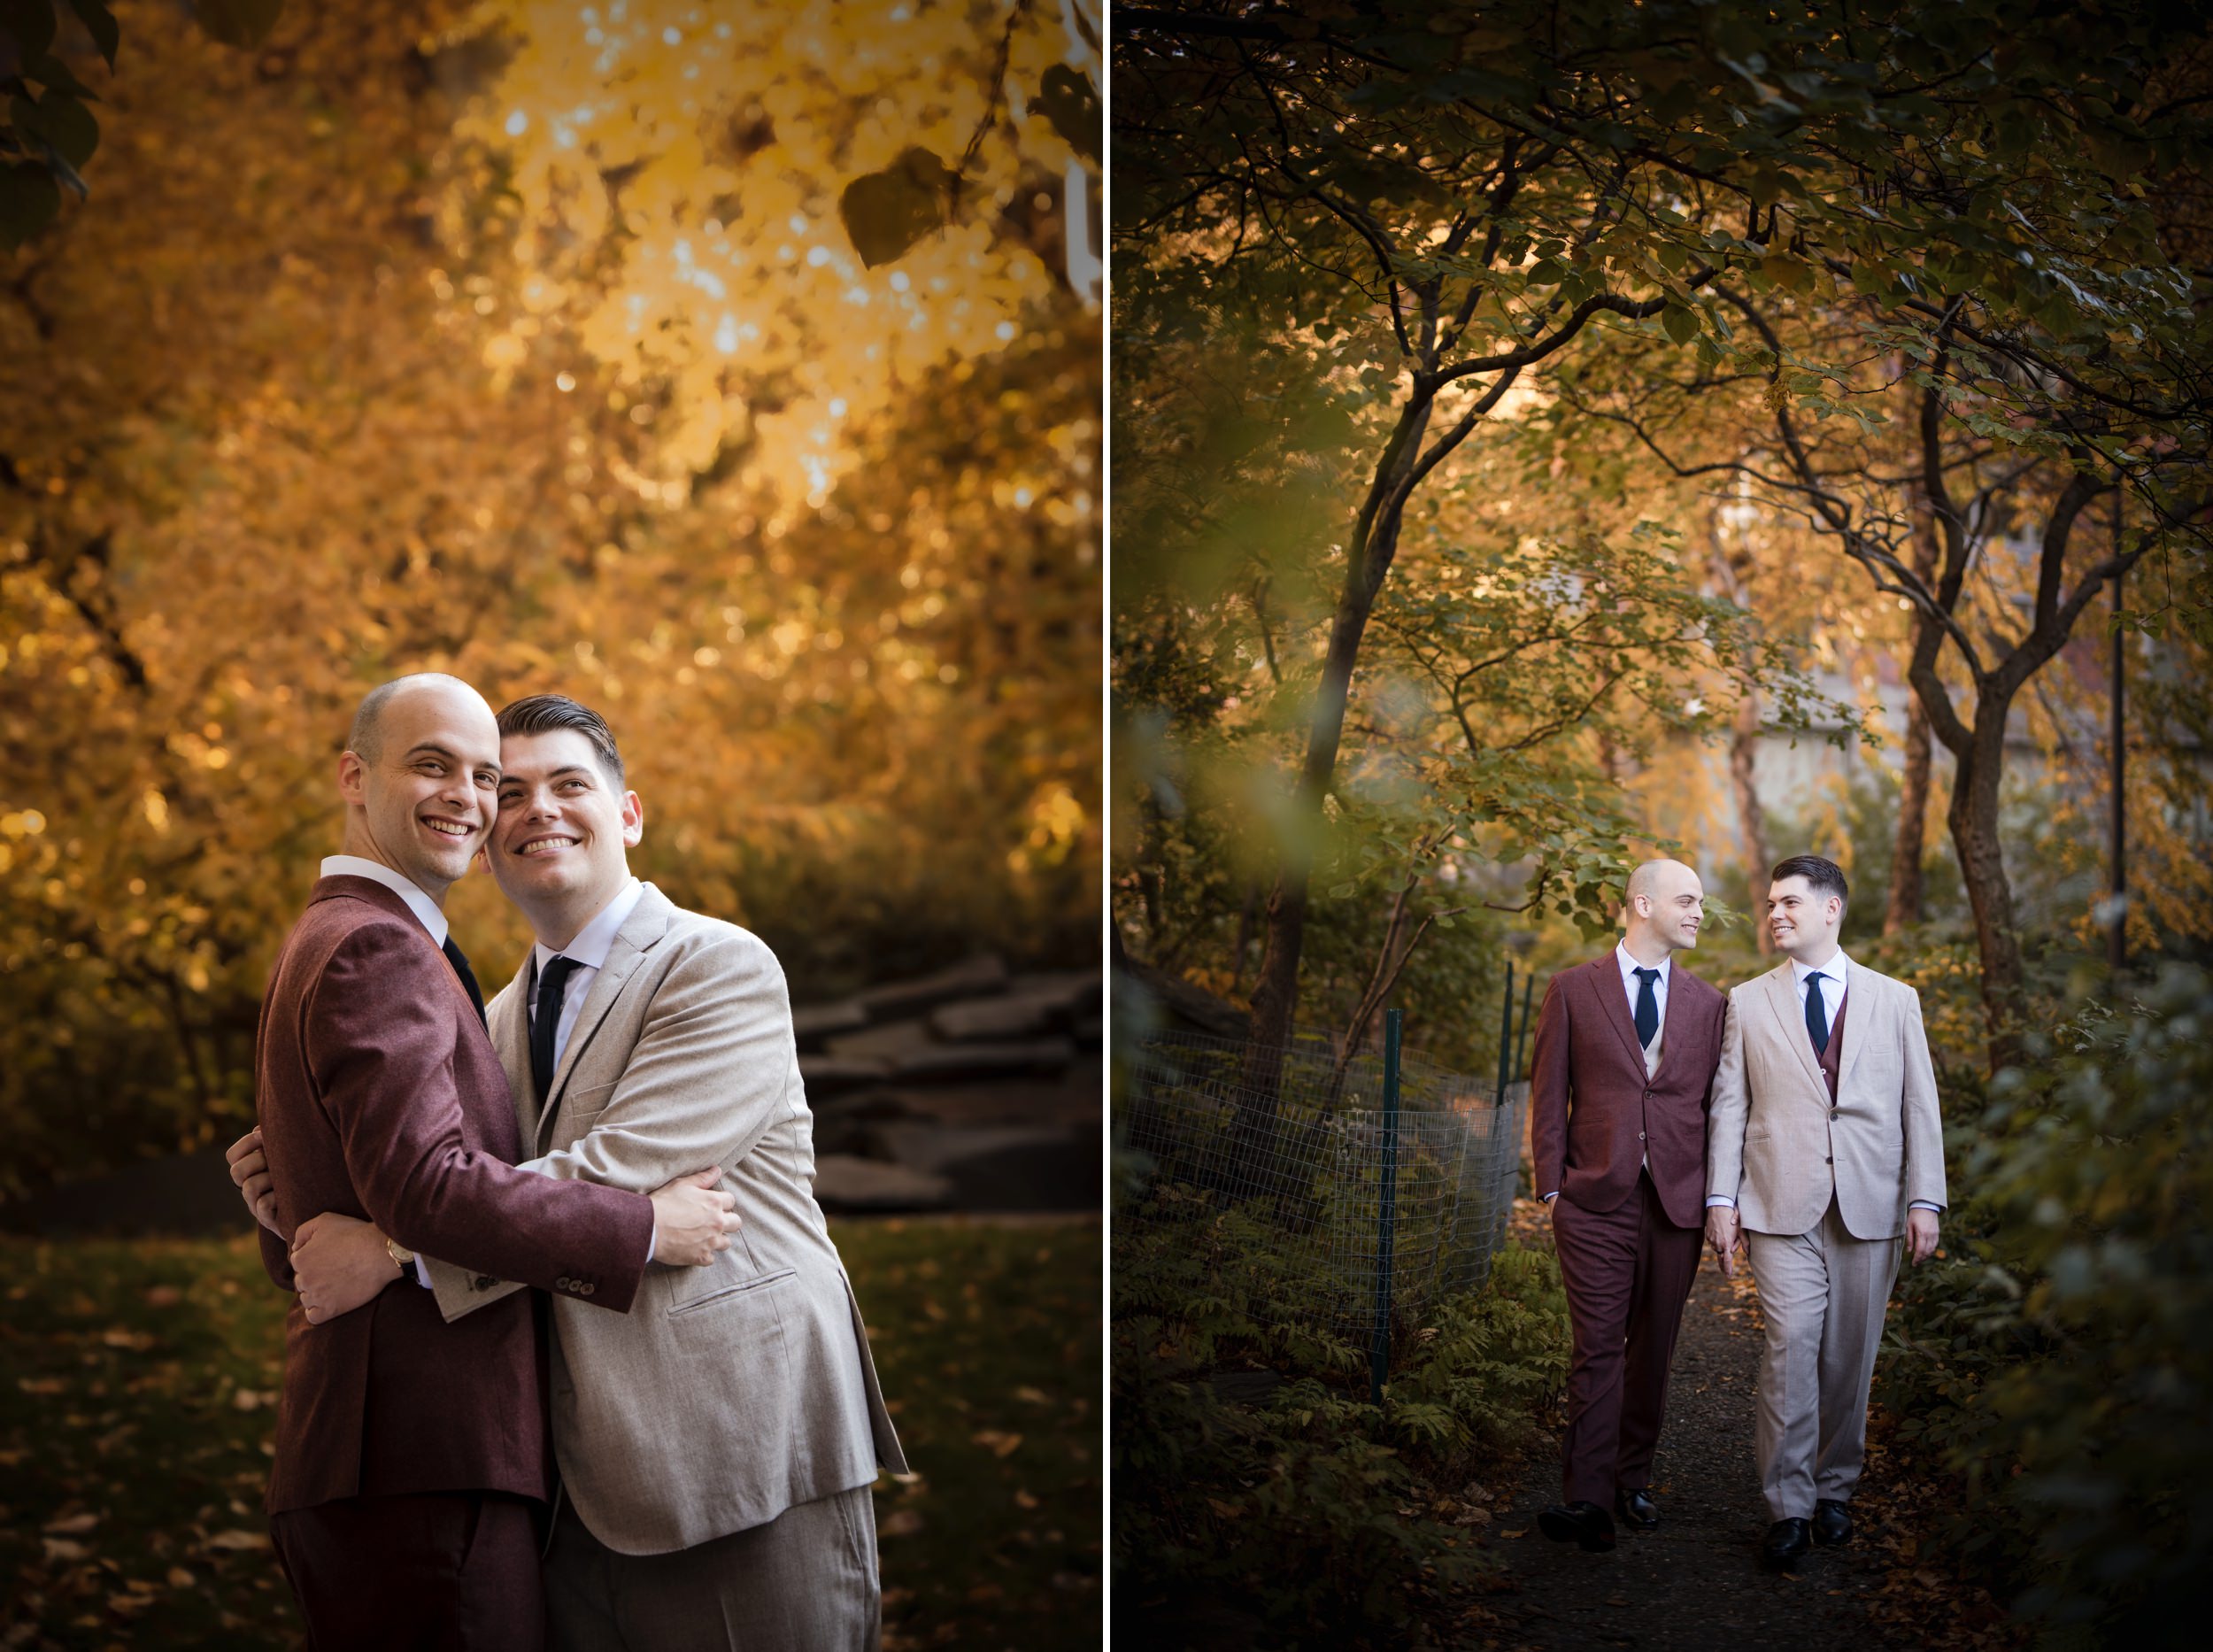 Two grooms taking wedding portraits in the fall colors of Teardrop Park in New York